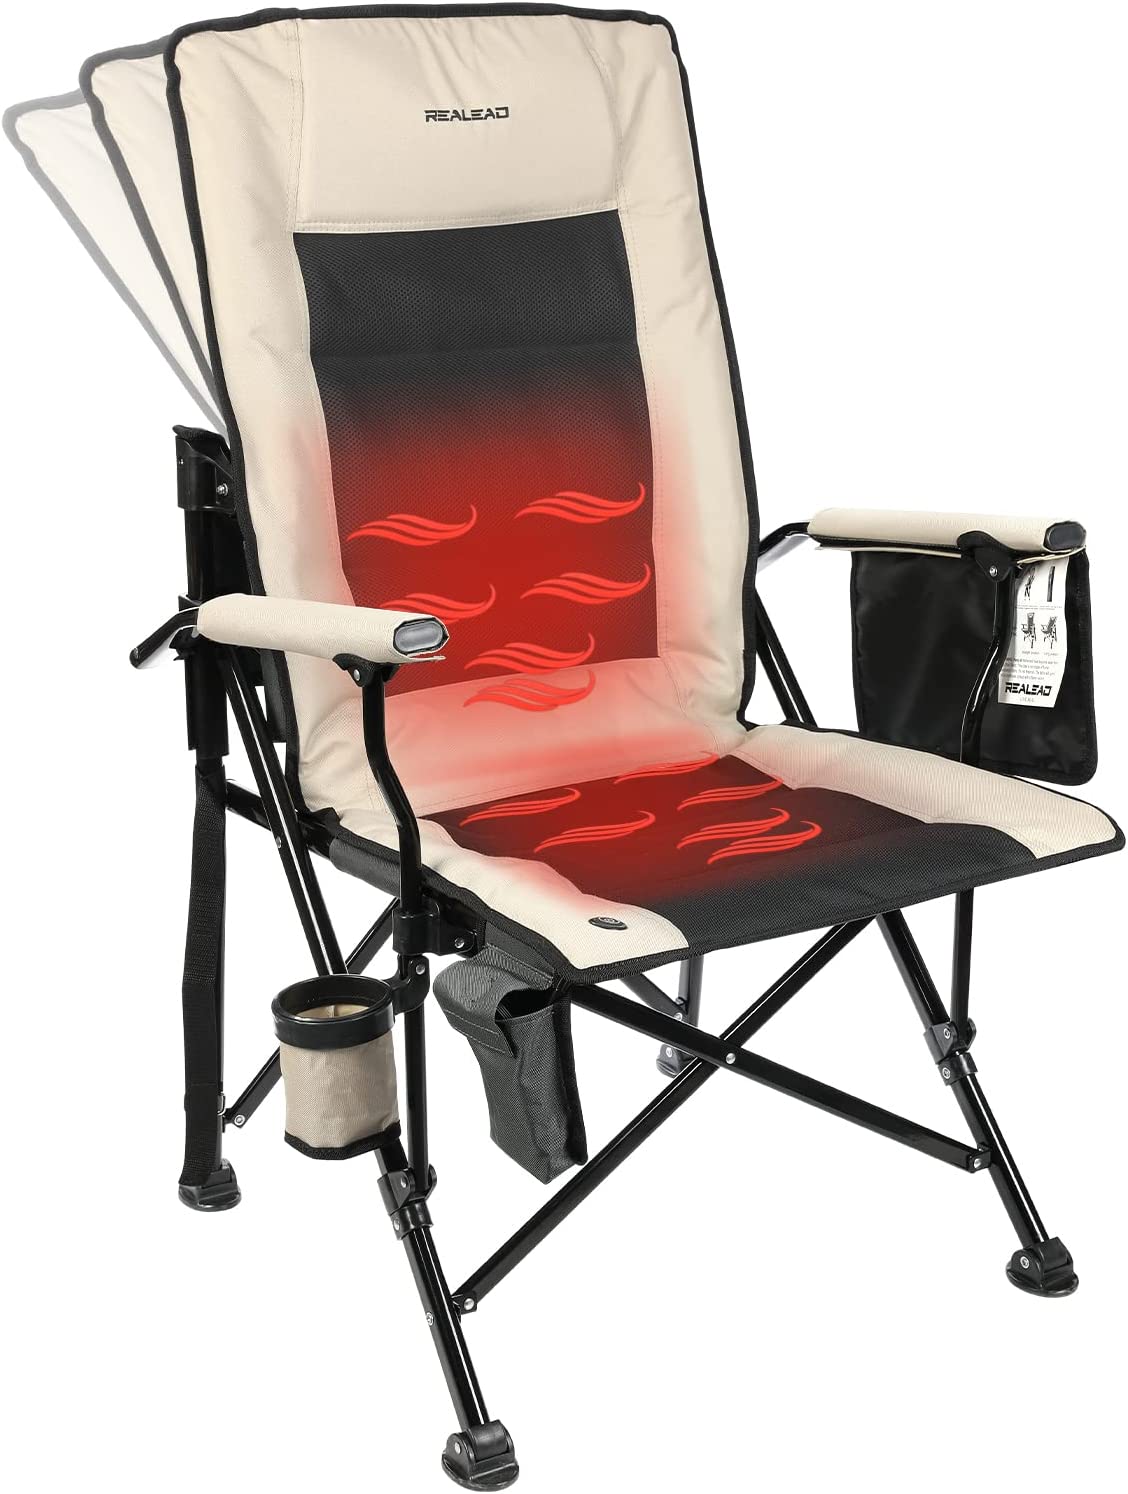 Review of Realead Heated Camping Chairs - Fully Padded